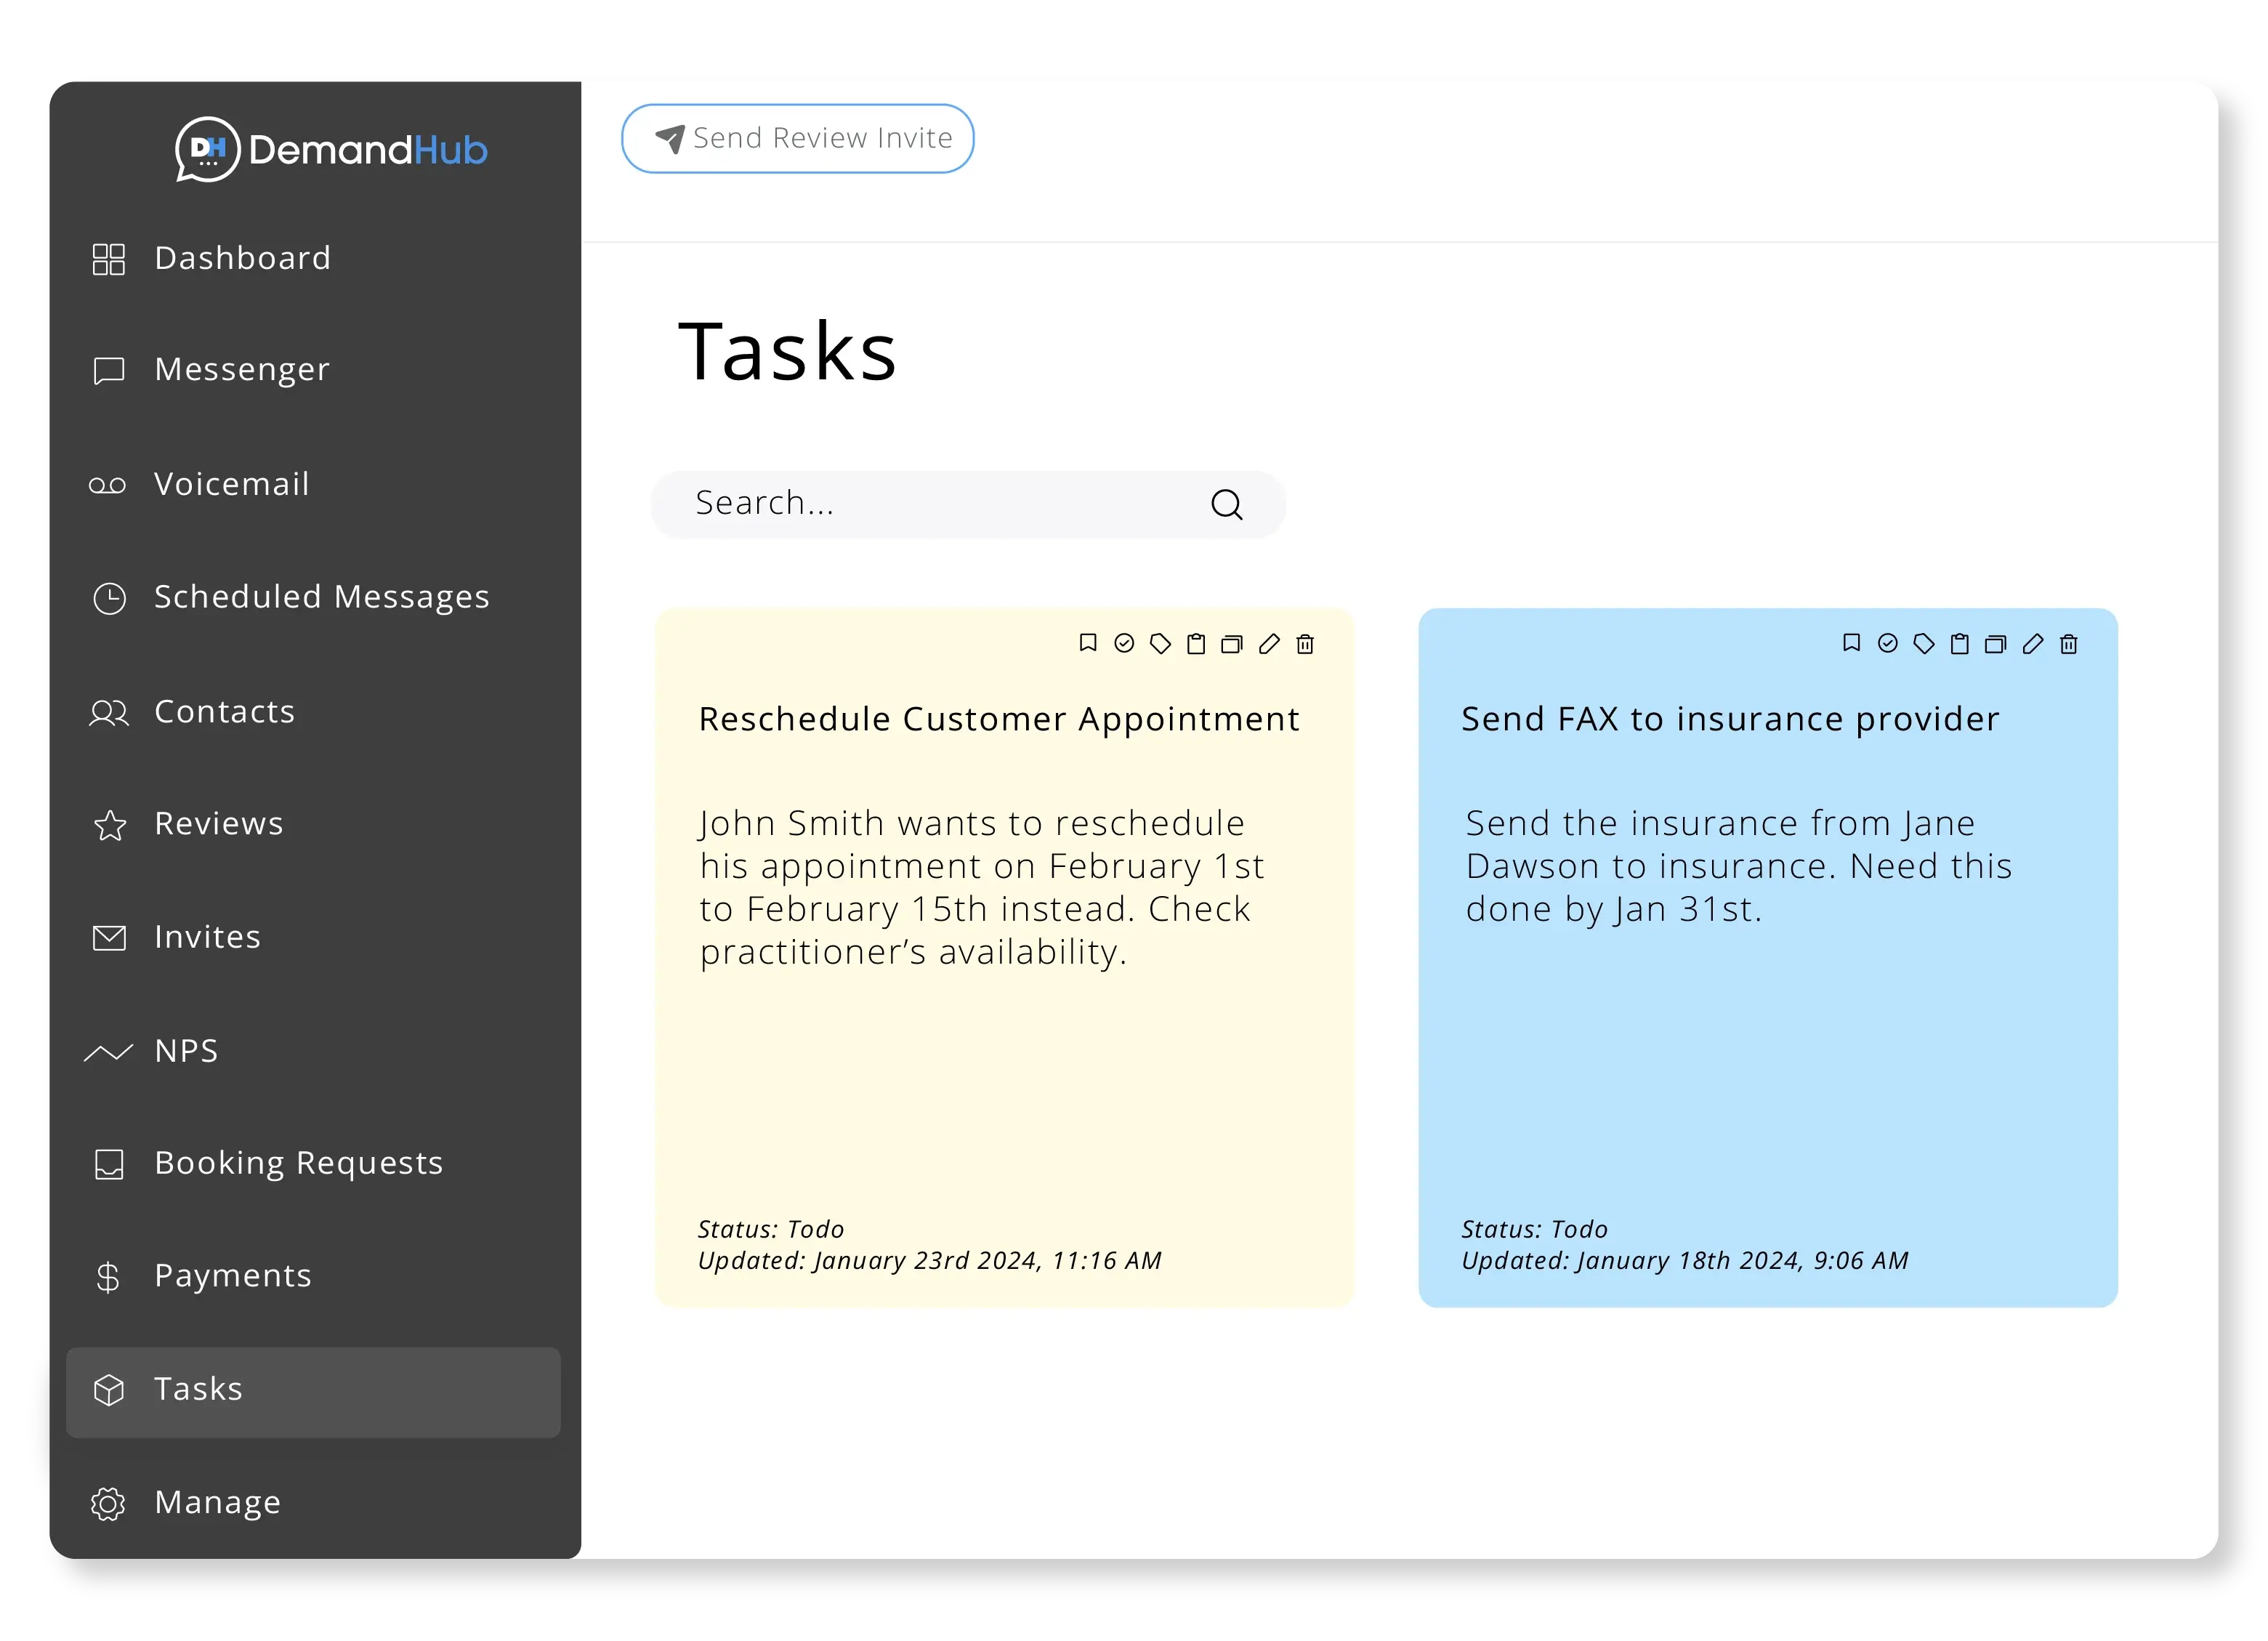 Organize Your Day with "Tasks"